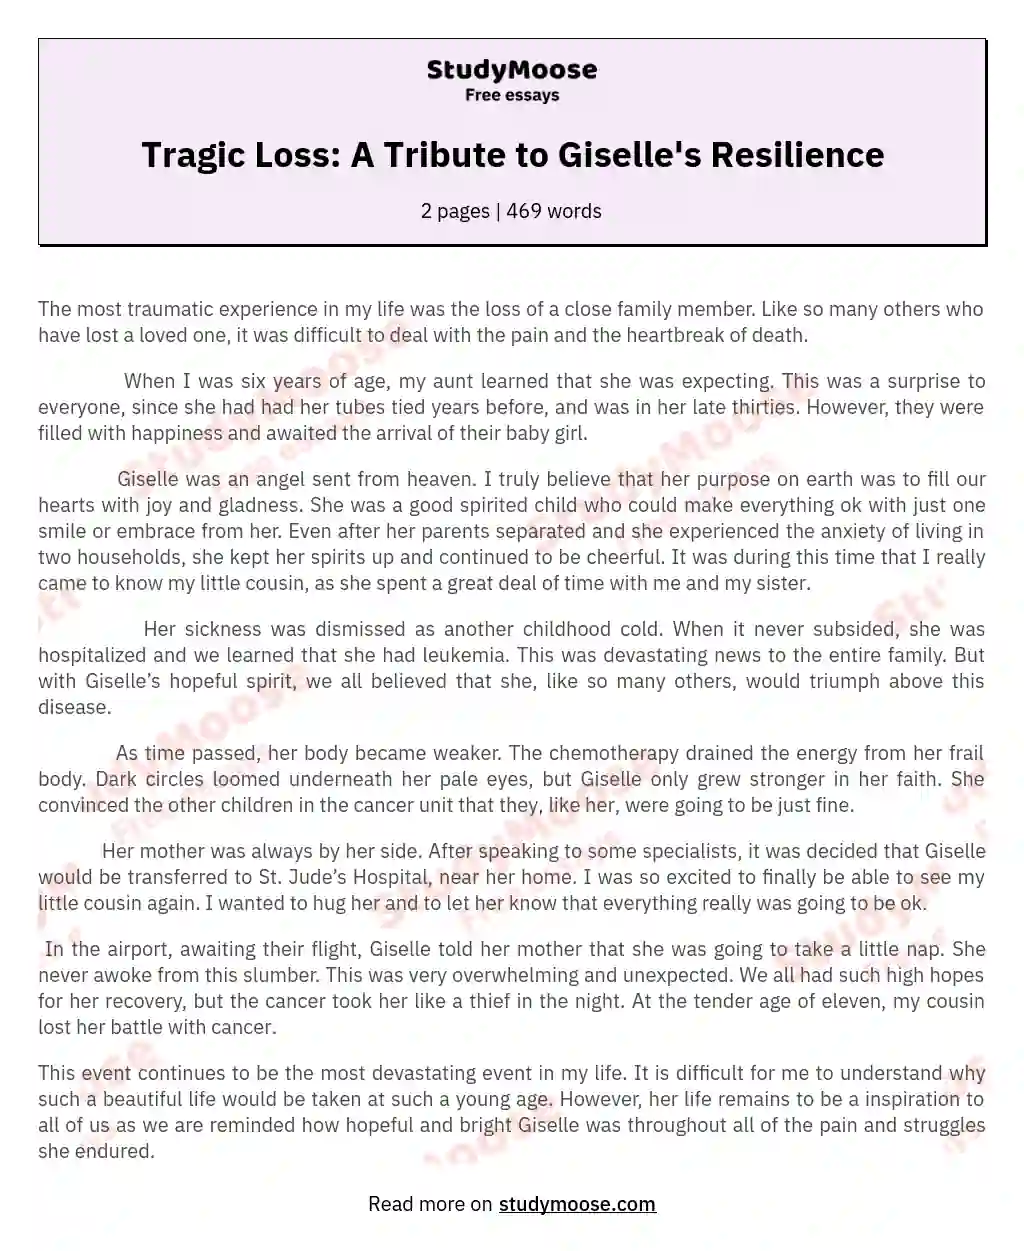 Tragic Loss: A Tribute to Giselle's Resilience essay